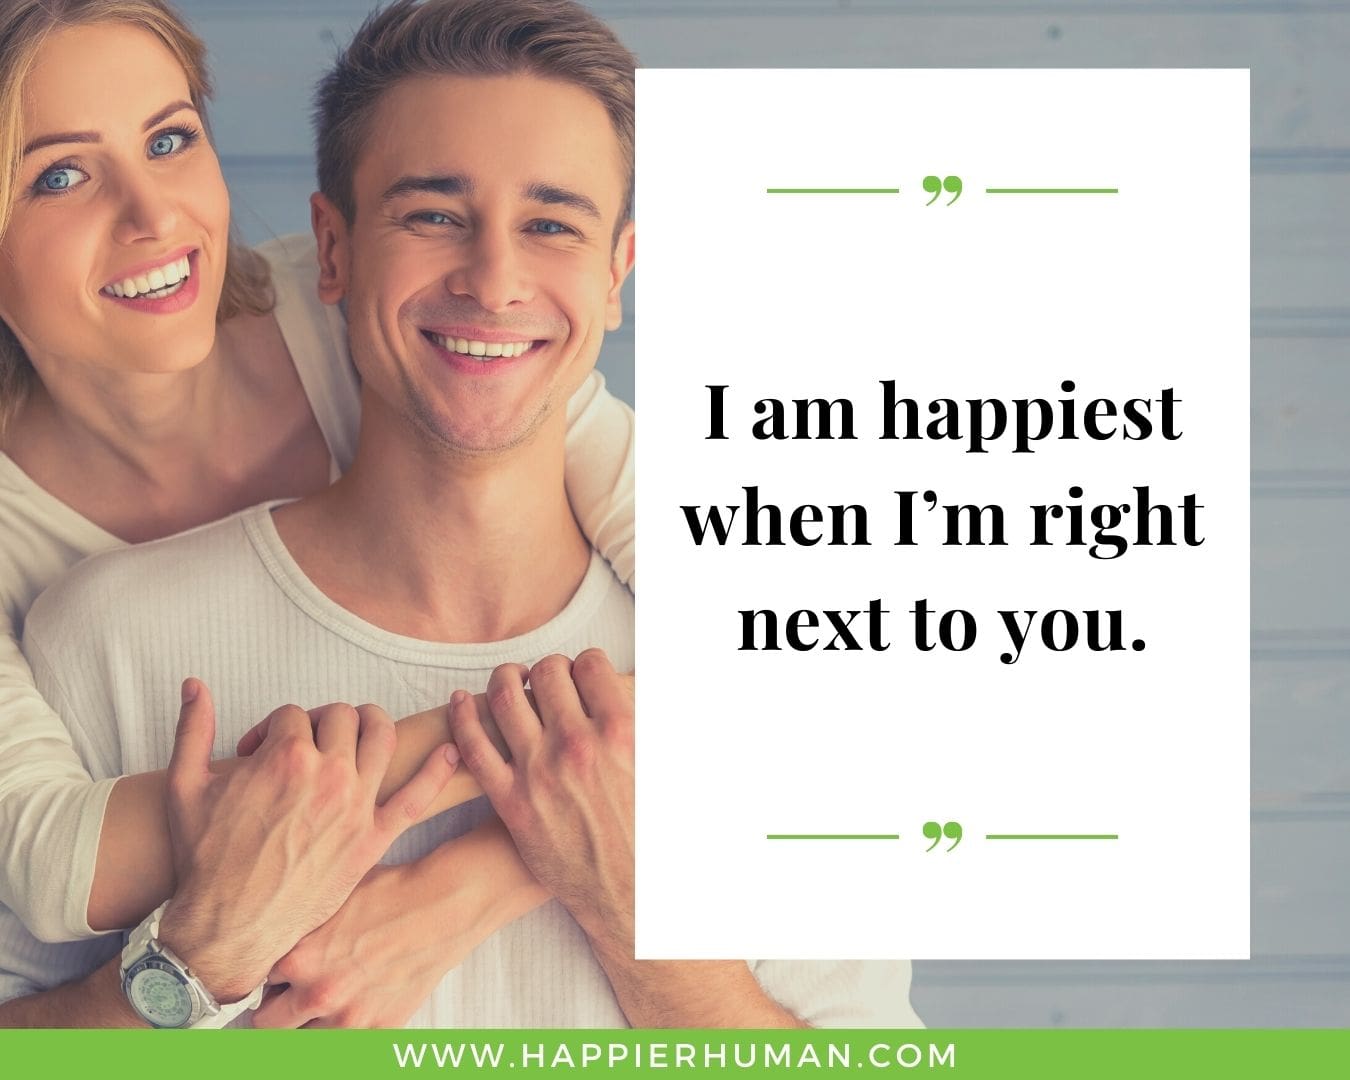 Happy Love Quotes for Her - “I am happiest when I’m right next to you.”